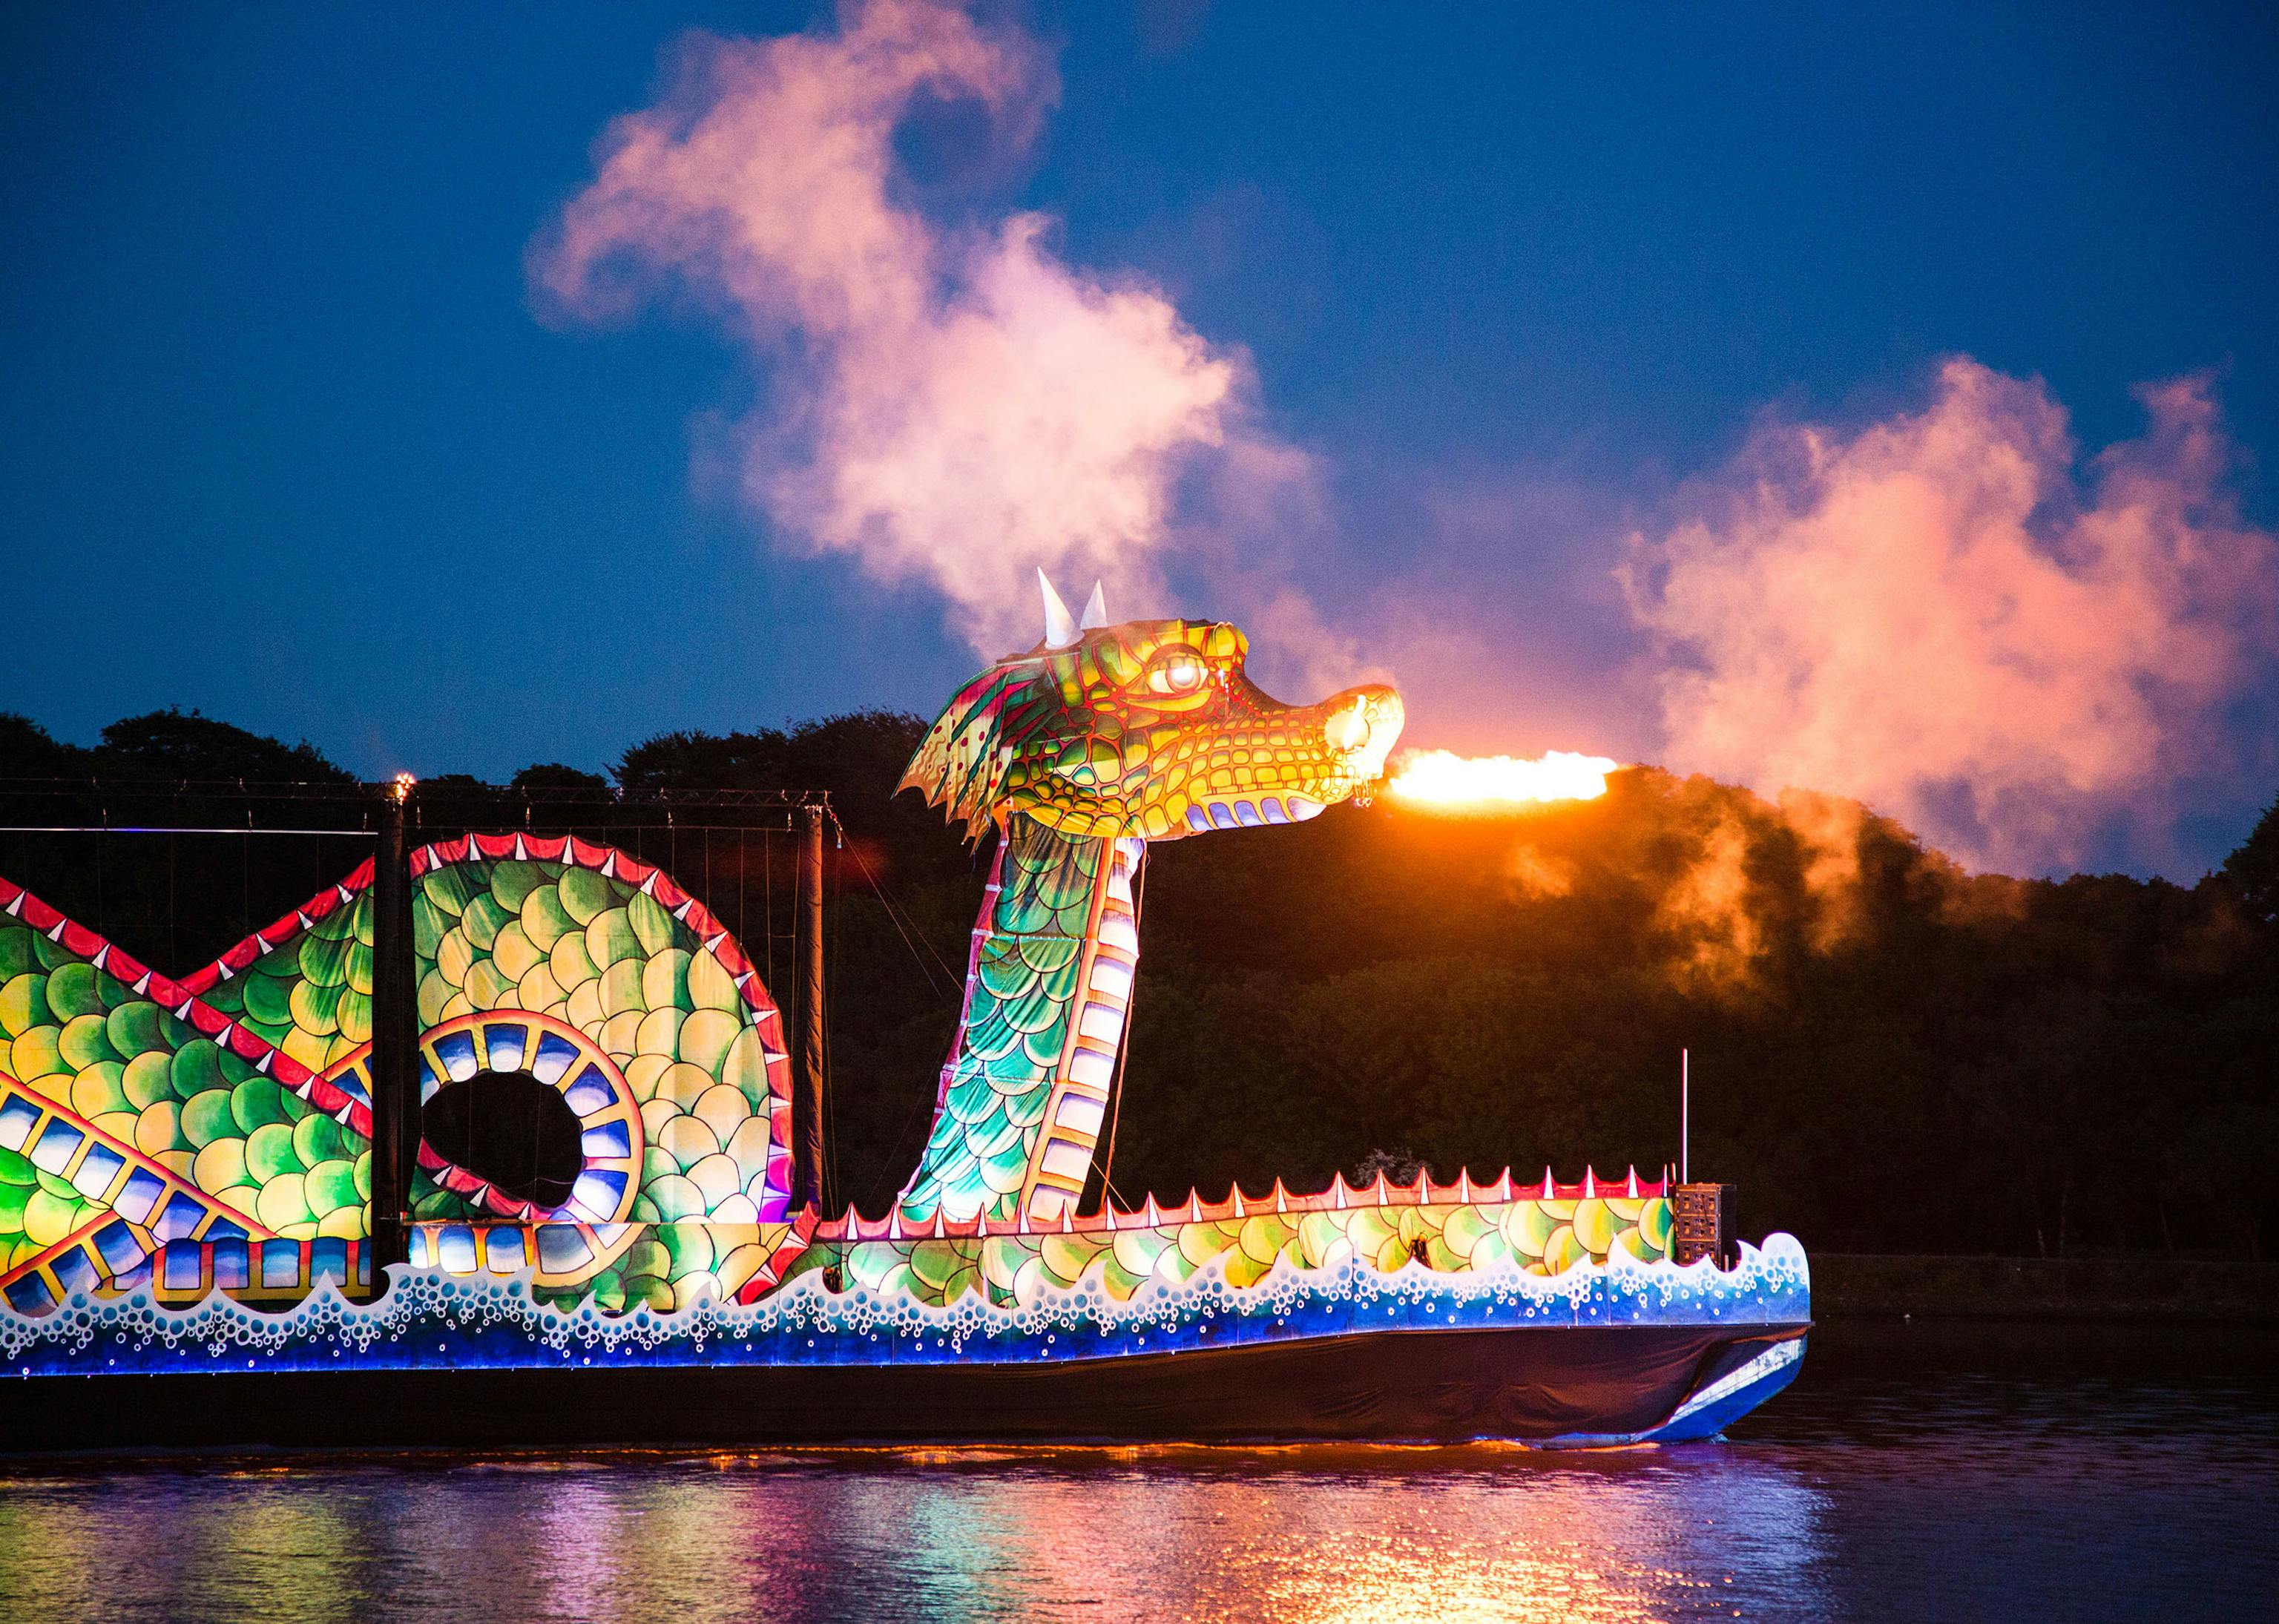 A large green dragon atop a boat breathing fire 